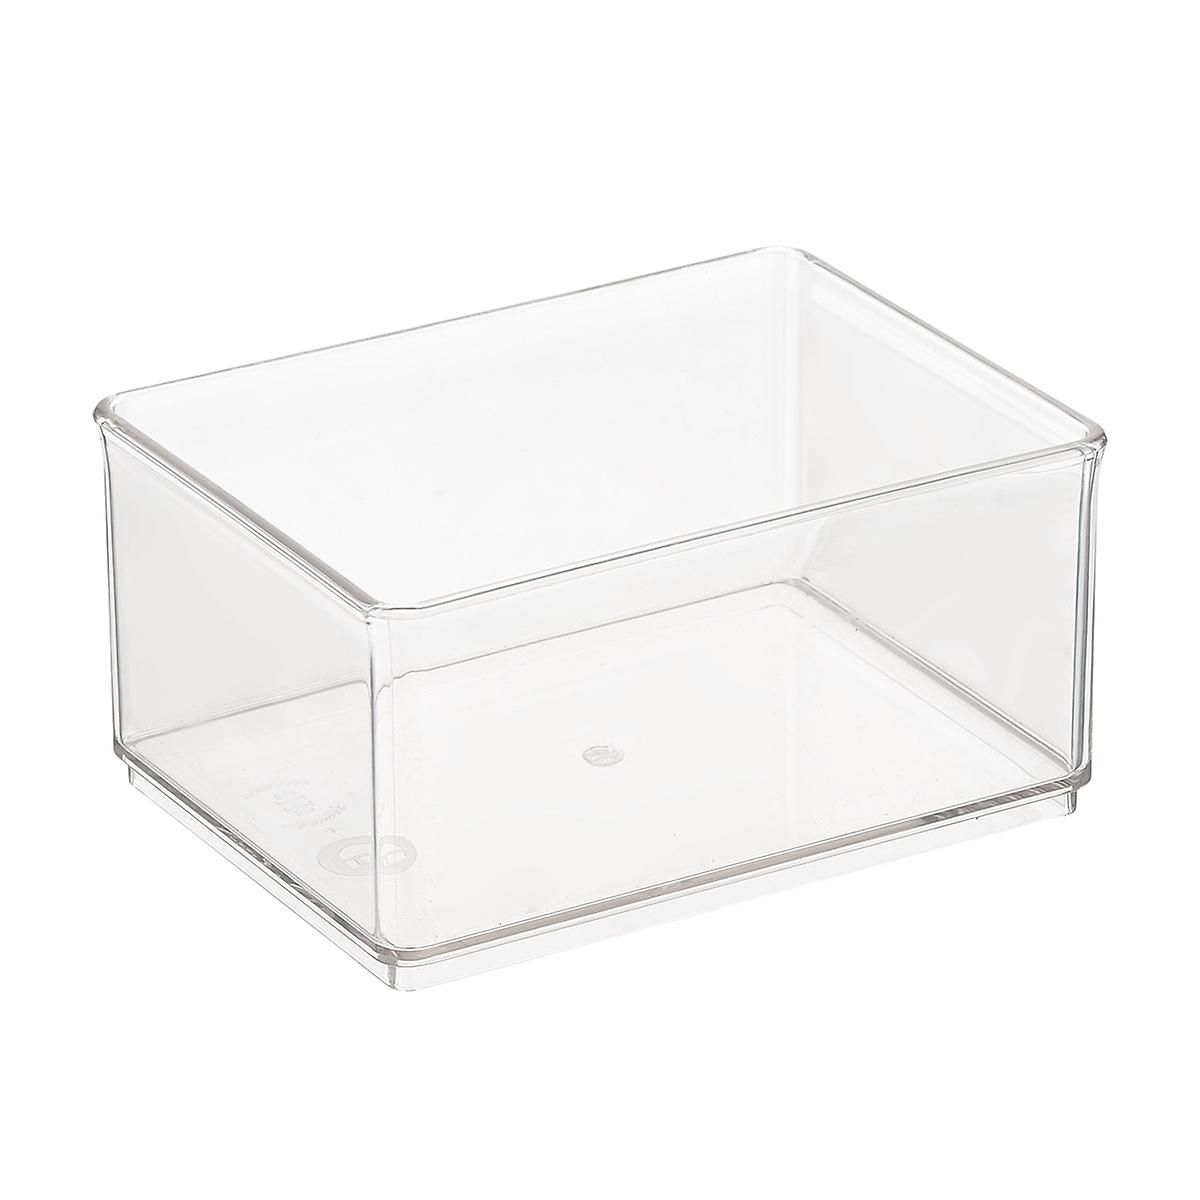 Case of 8 T.H.E. Large Bin Organizer | The Container Store